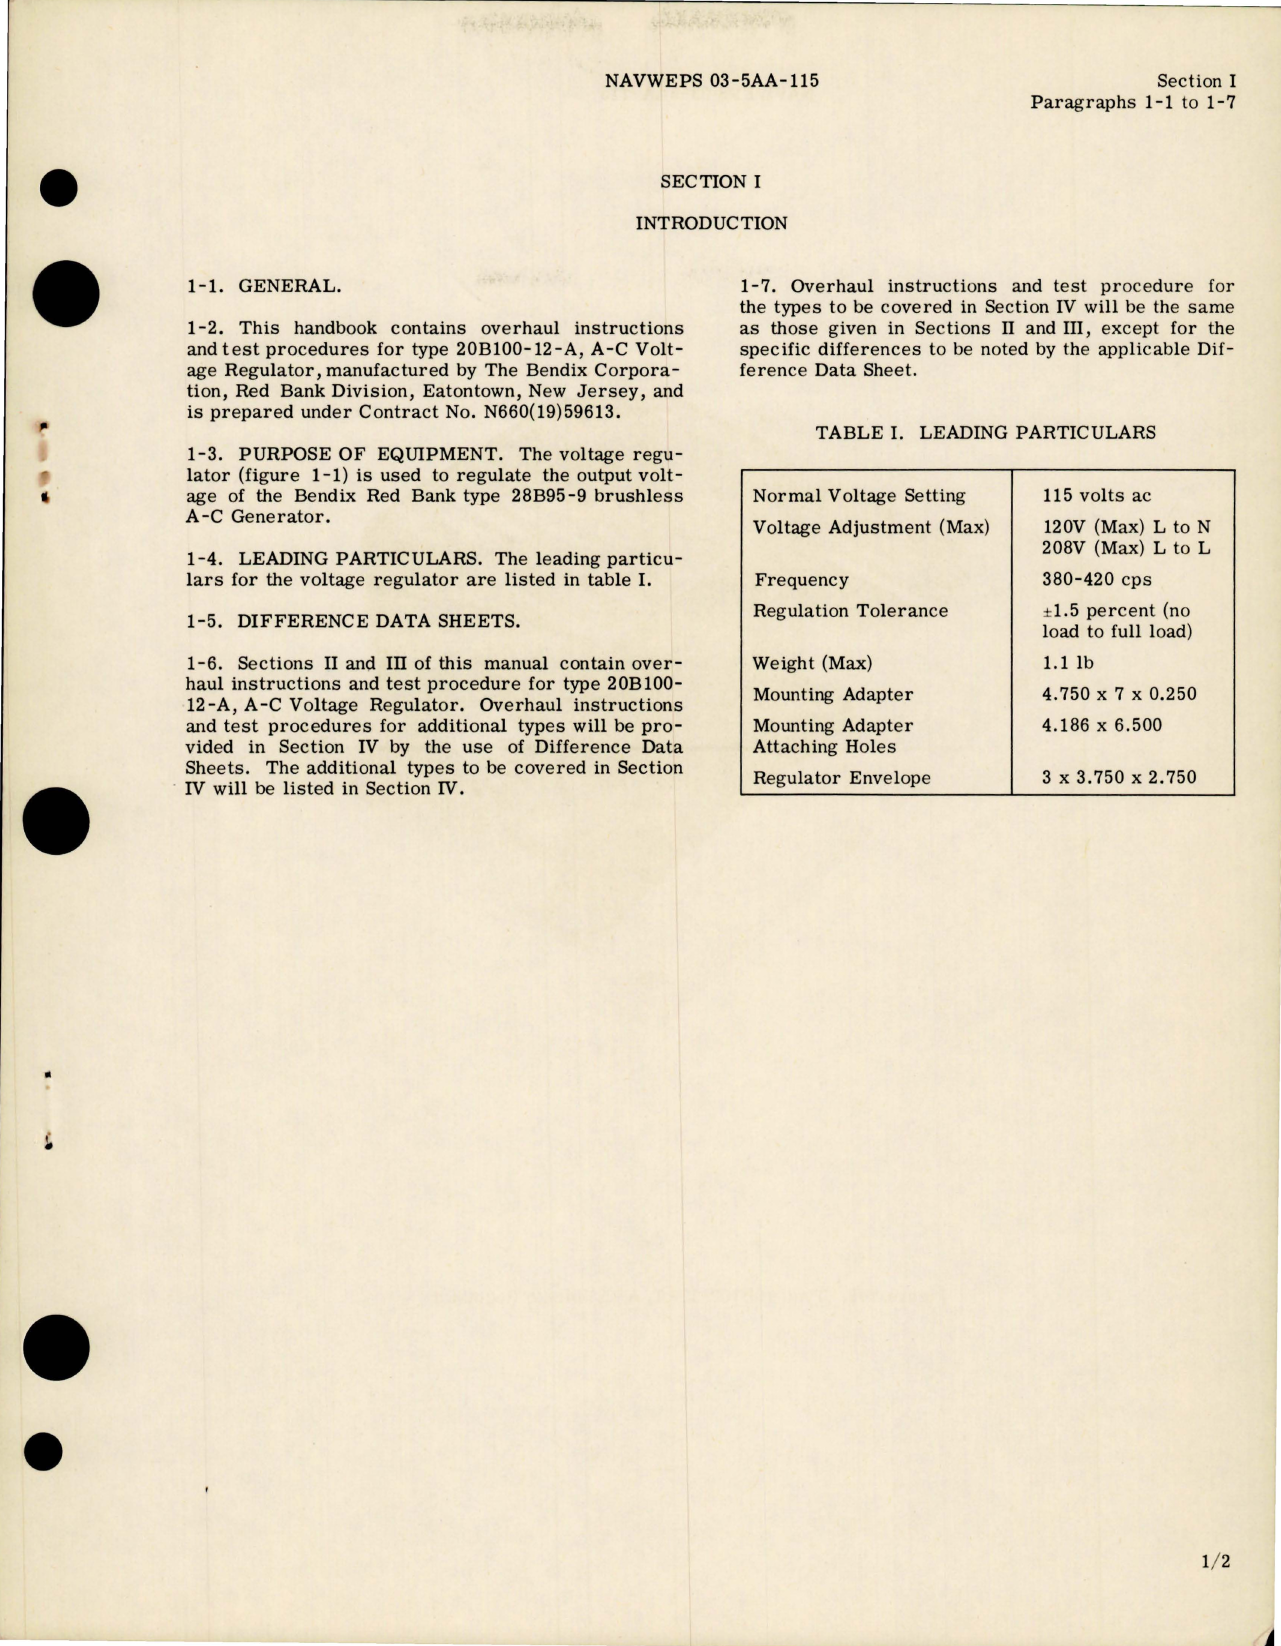 Sample page 5 from AirCorps Library document: Overhaul Instructions for AC Voltage Regulator - Type 20B100-12-A